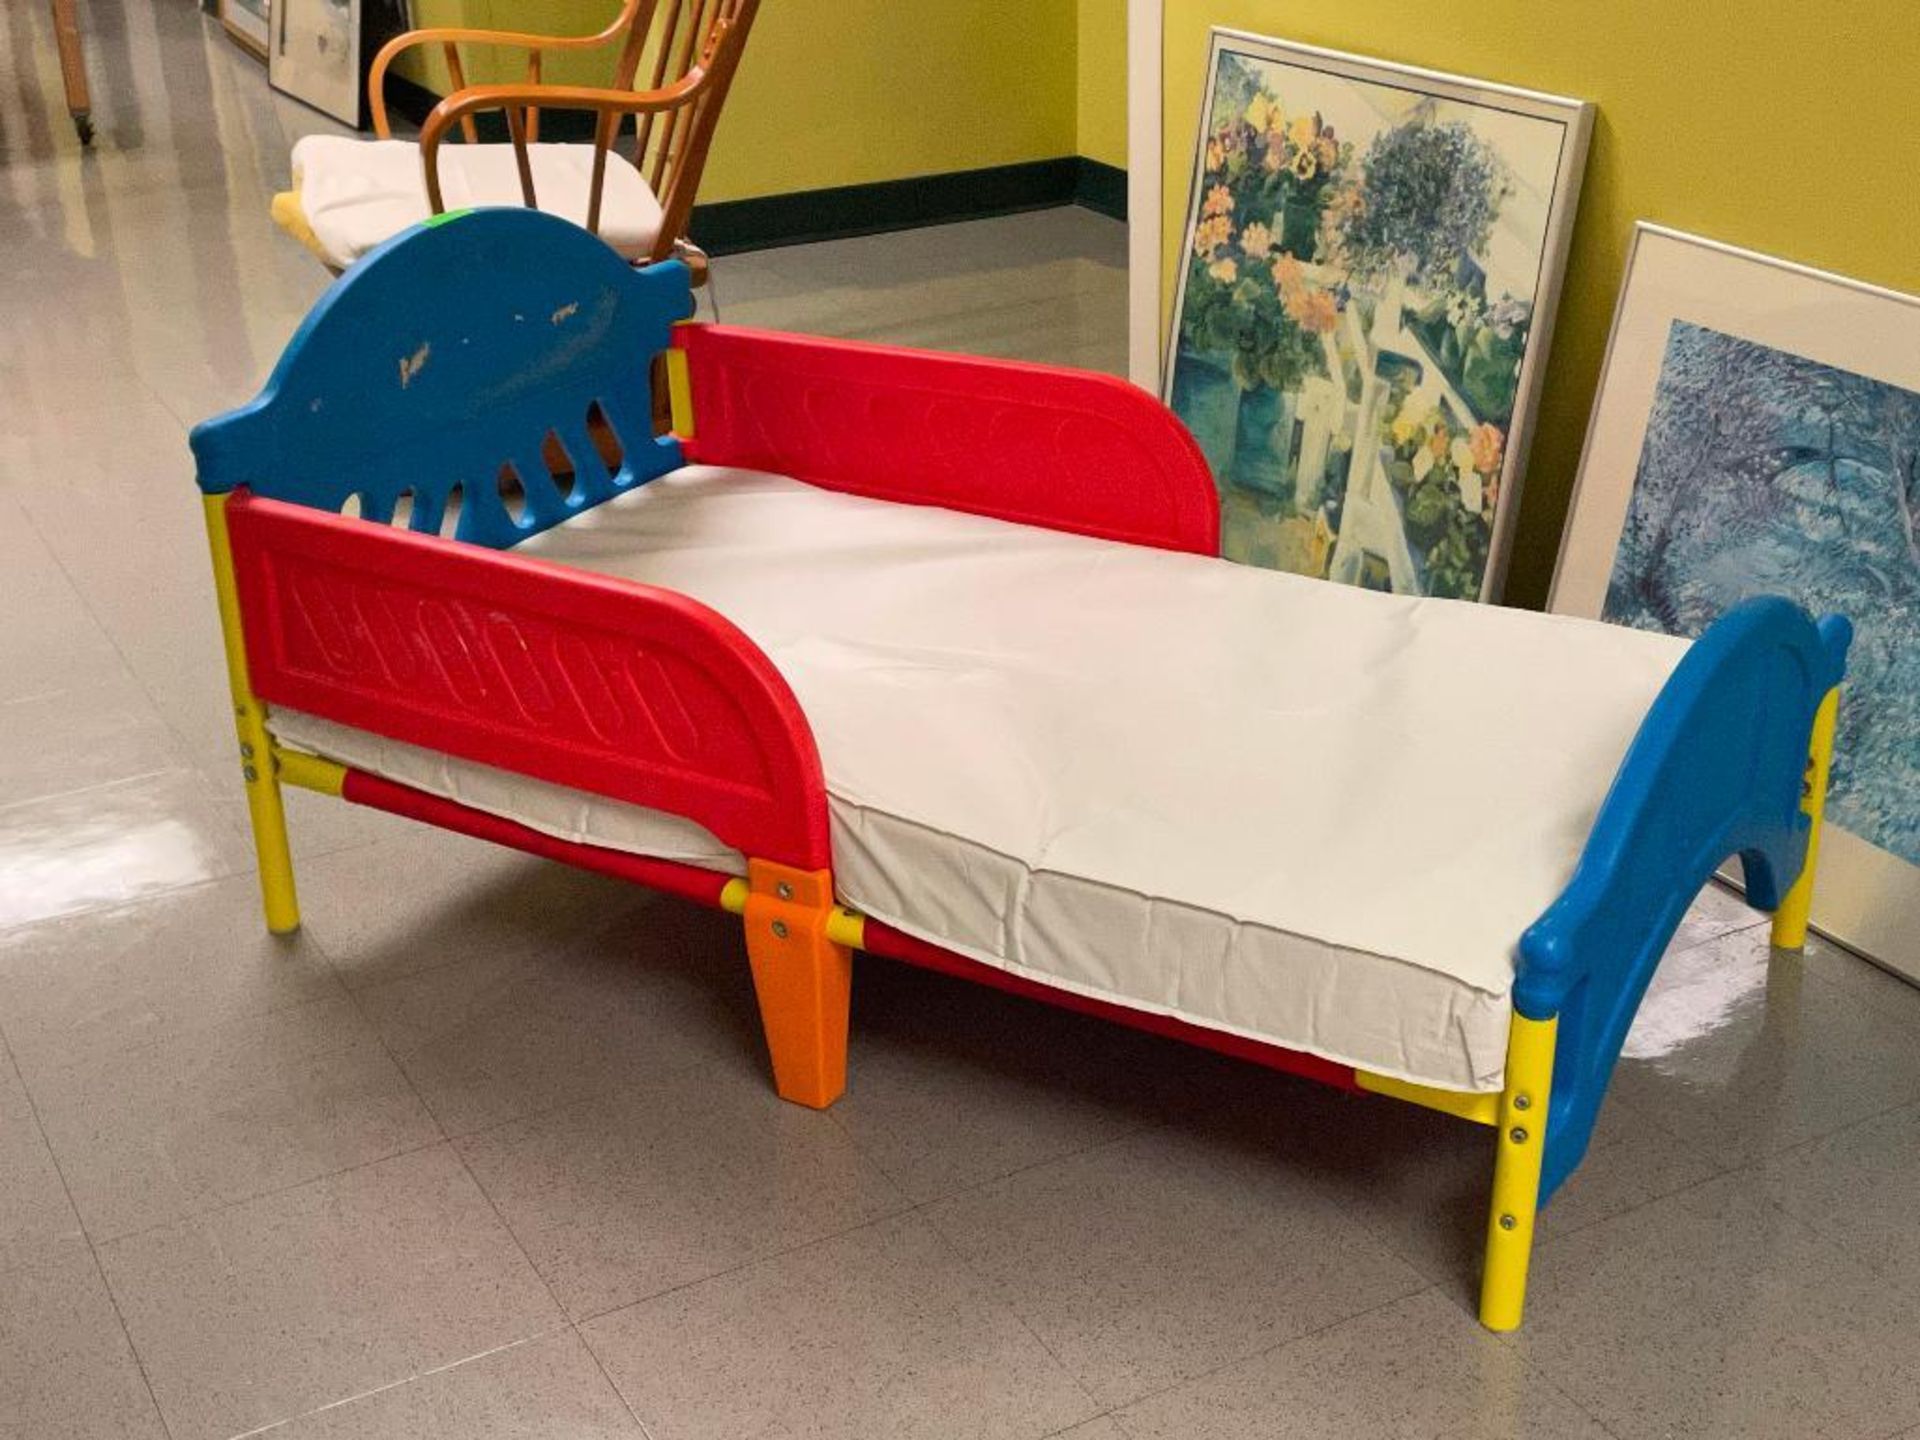 DESCRIPTION: CHILDREN'S BED FRAME AND MATTRESS THIS LOT IS: ONE MONEY QTY: 1